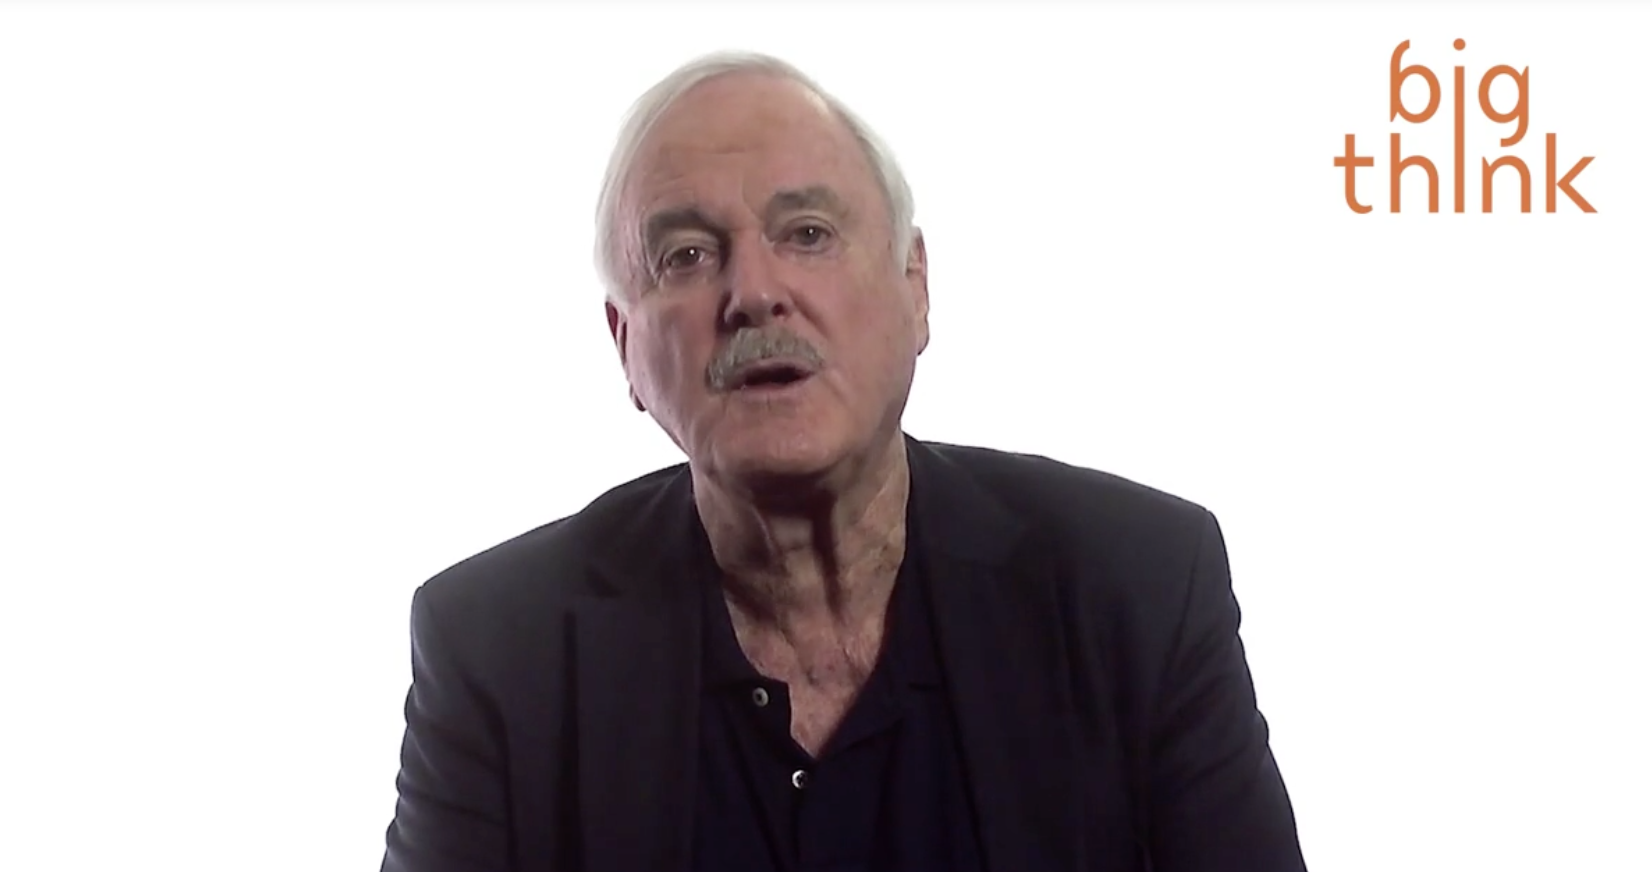 John Cleese apologizes for offending white people seemingly as a way of  mocking Hank Azaria's apology for Apu, also complains about wokeness and  cancel culture : r/GamerGhazi